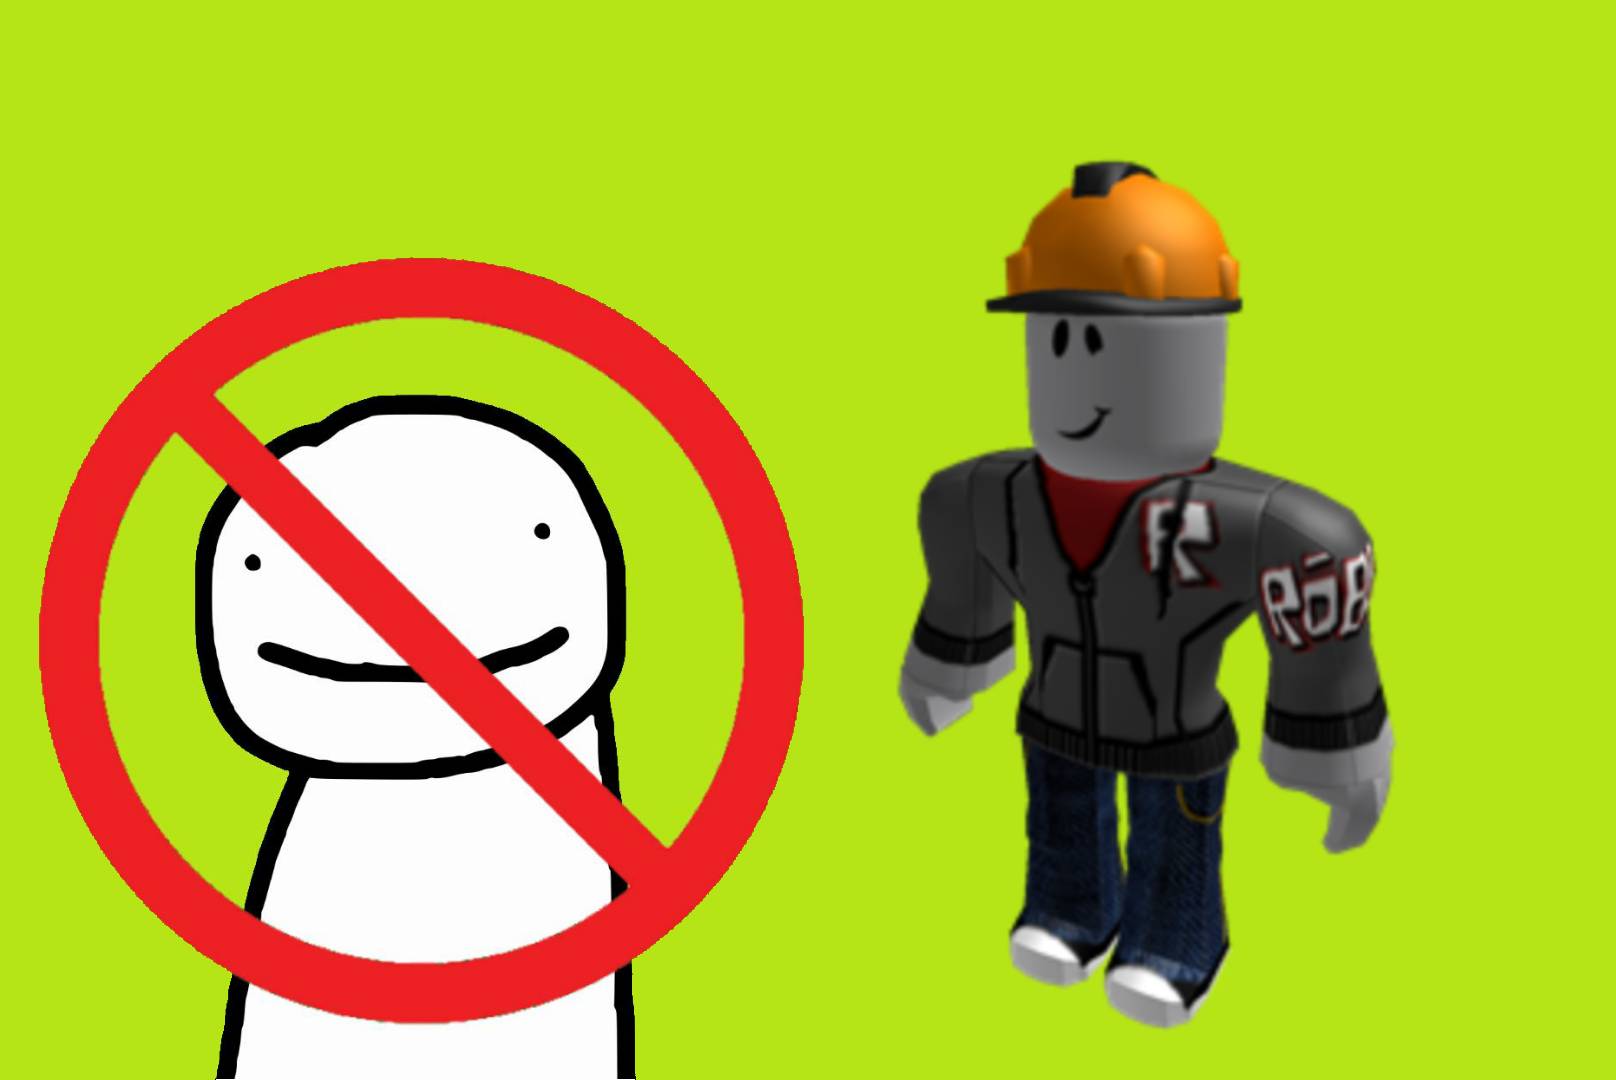 InstaIIationWizard on X: builderman and ROBLOX These are the